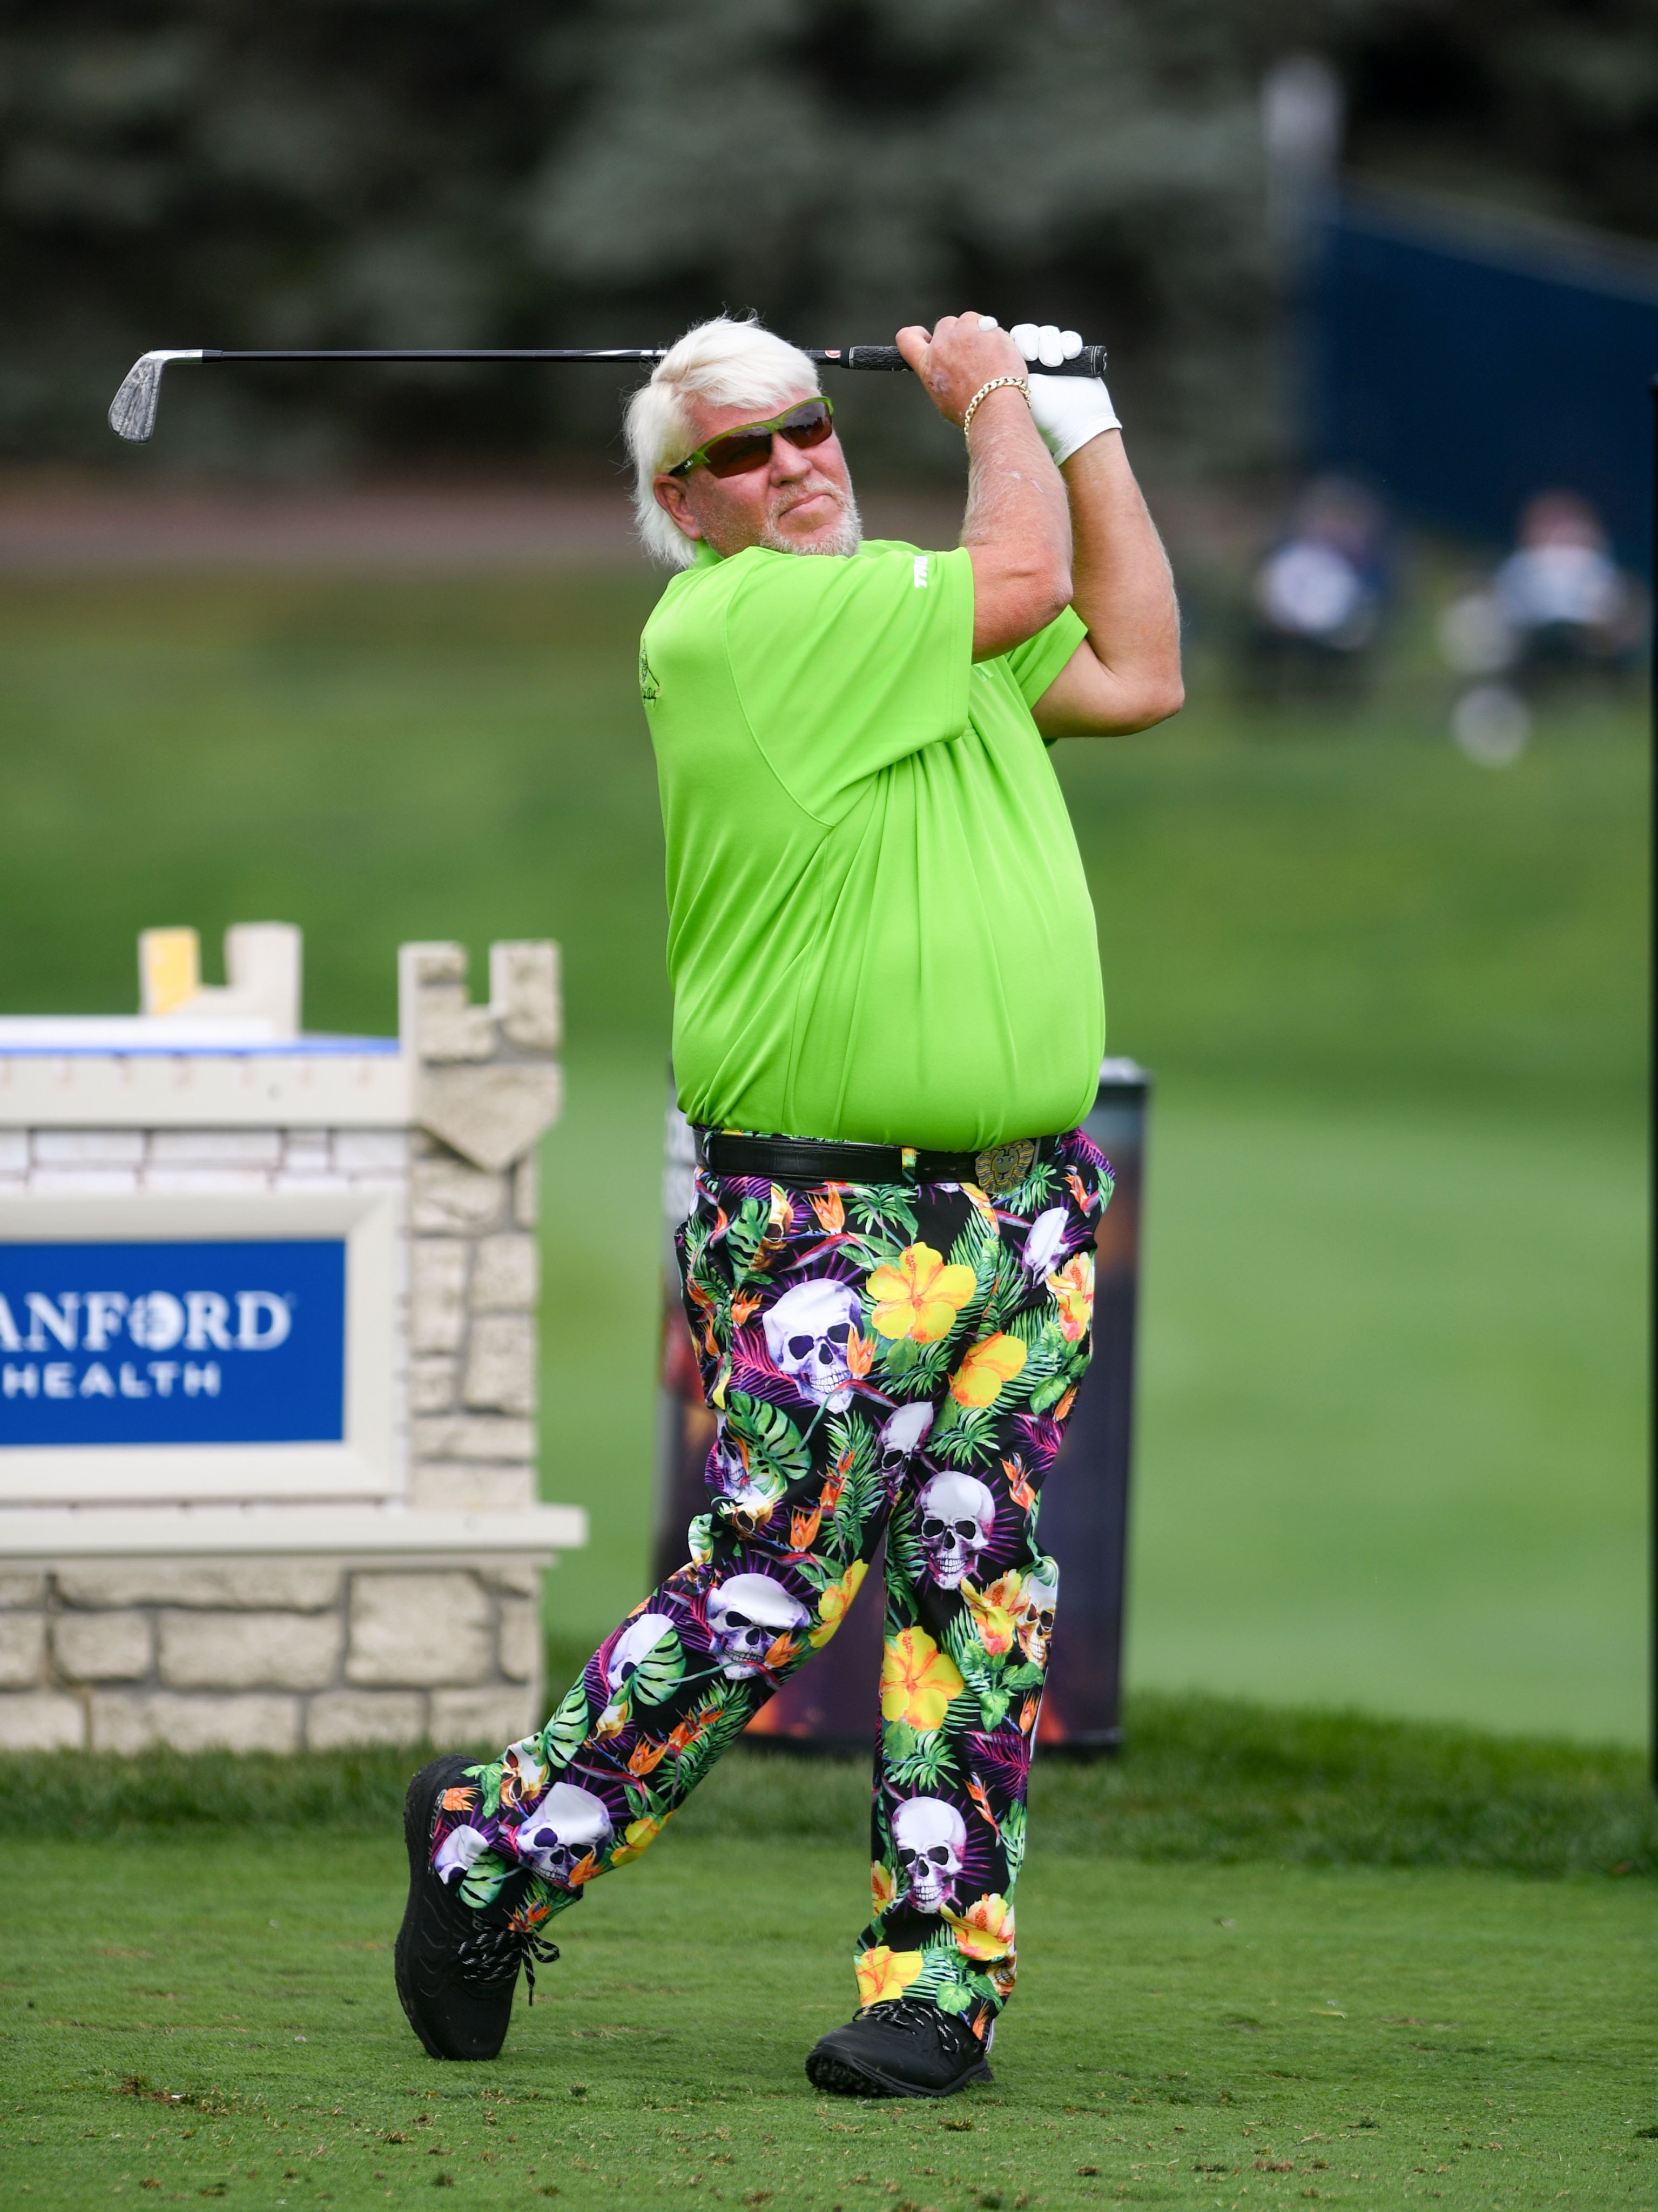 Erin Woodiel on X: John Daly outfit of the day - jungle skull